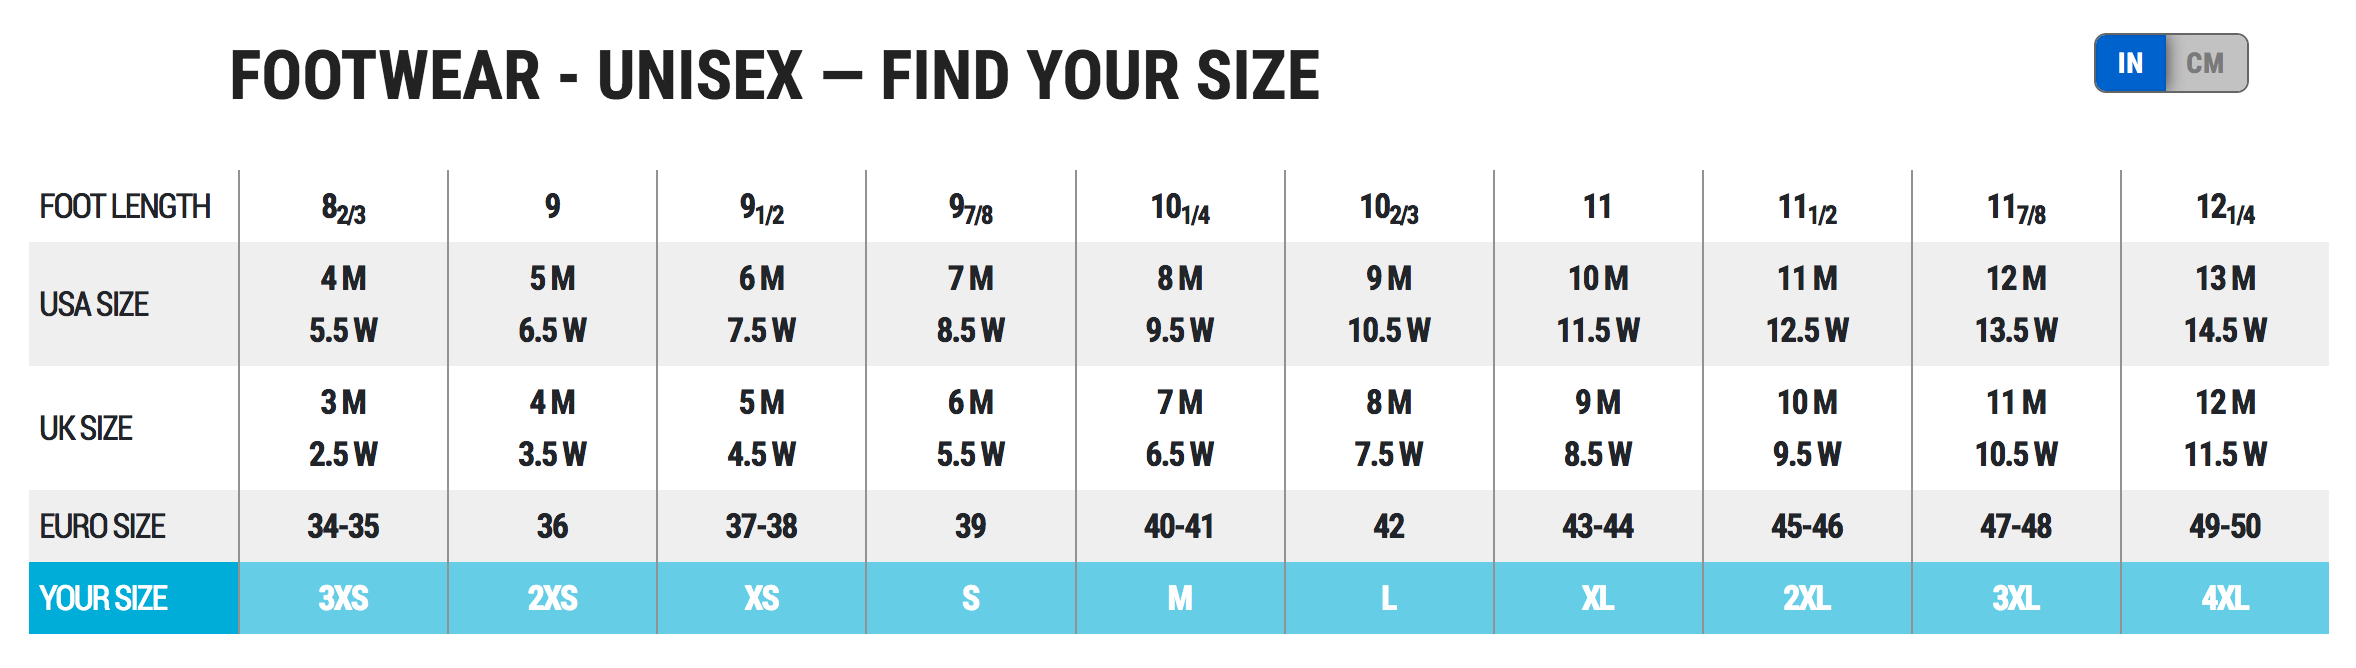 Size Chart for 7mm Ultrawarmth Boots